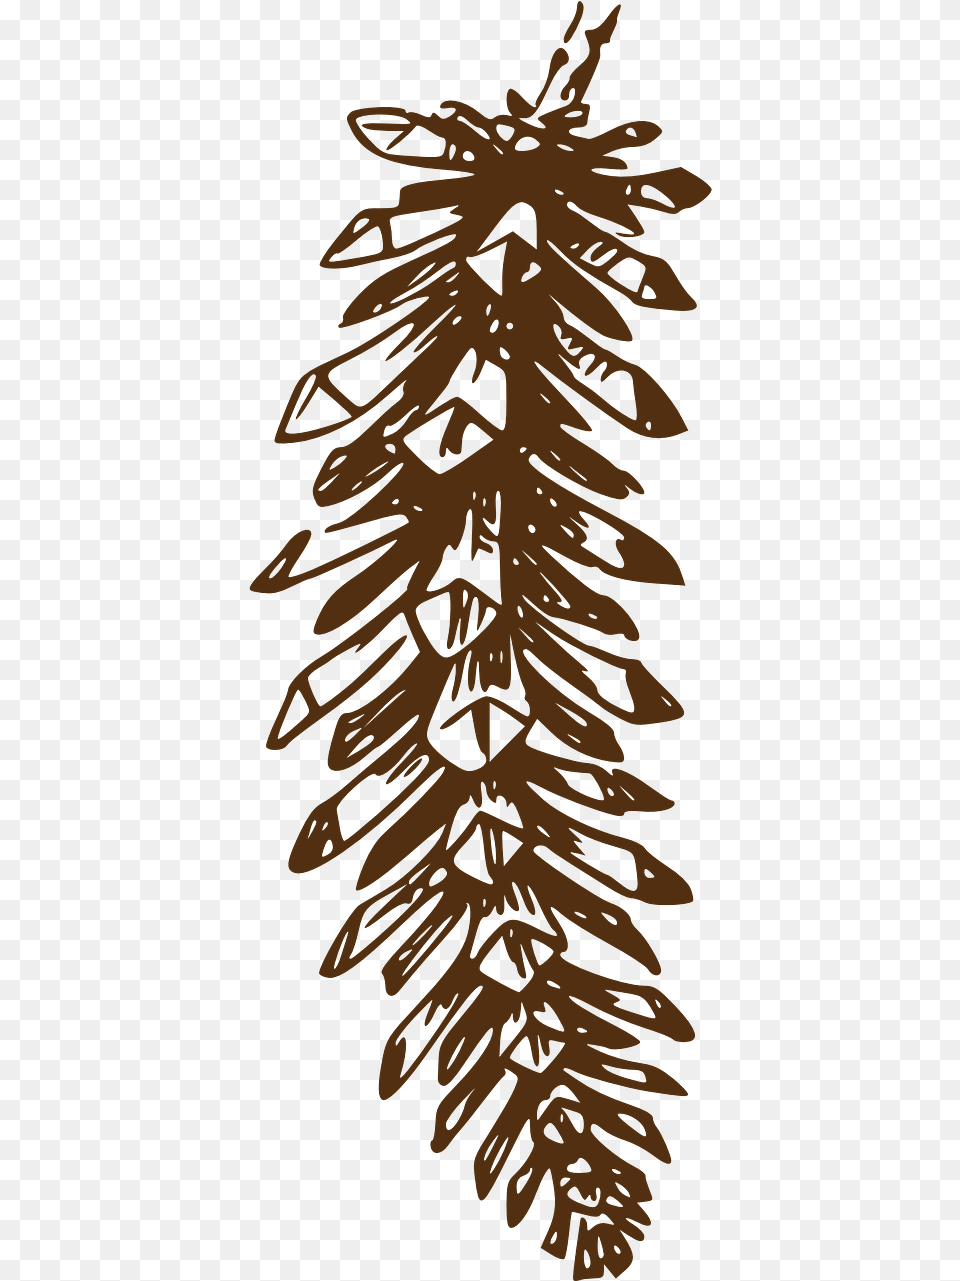 Pine Cone Clip Art, Wood, Plant, Tree, Outdoors Png